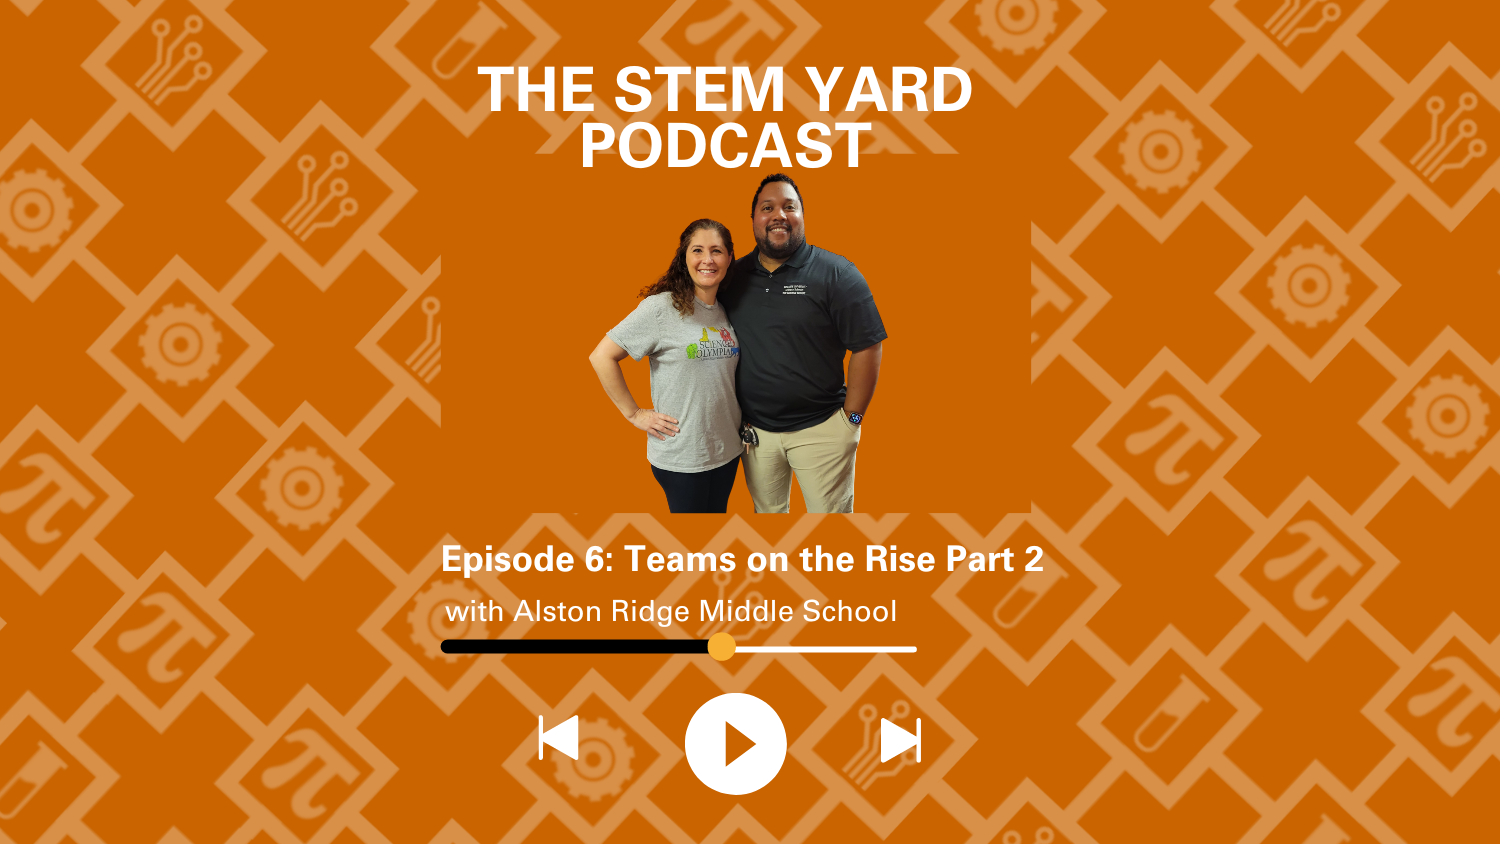 Episode 6 - Teams on the Rise Part 2 with Alston Ridge Middle School